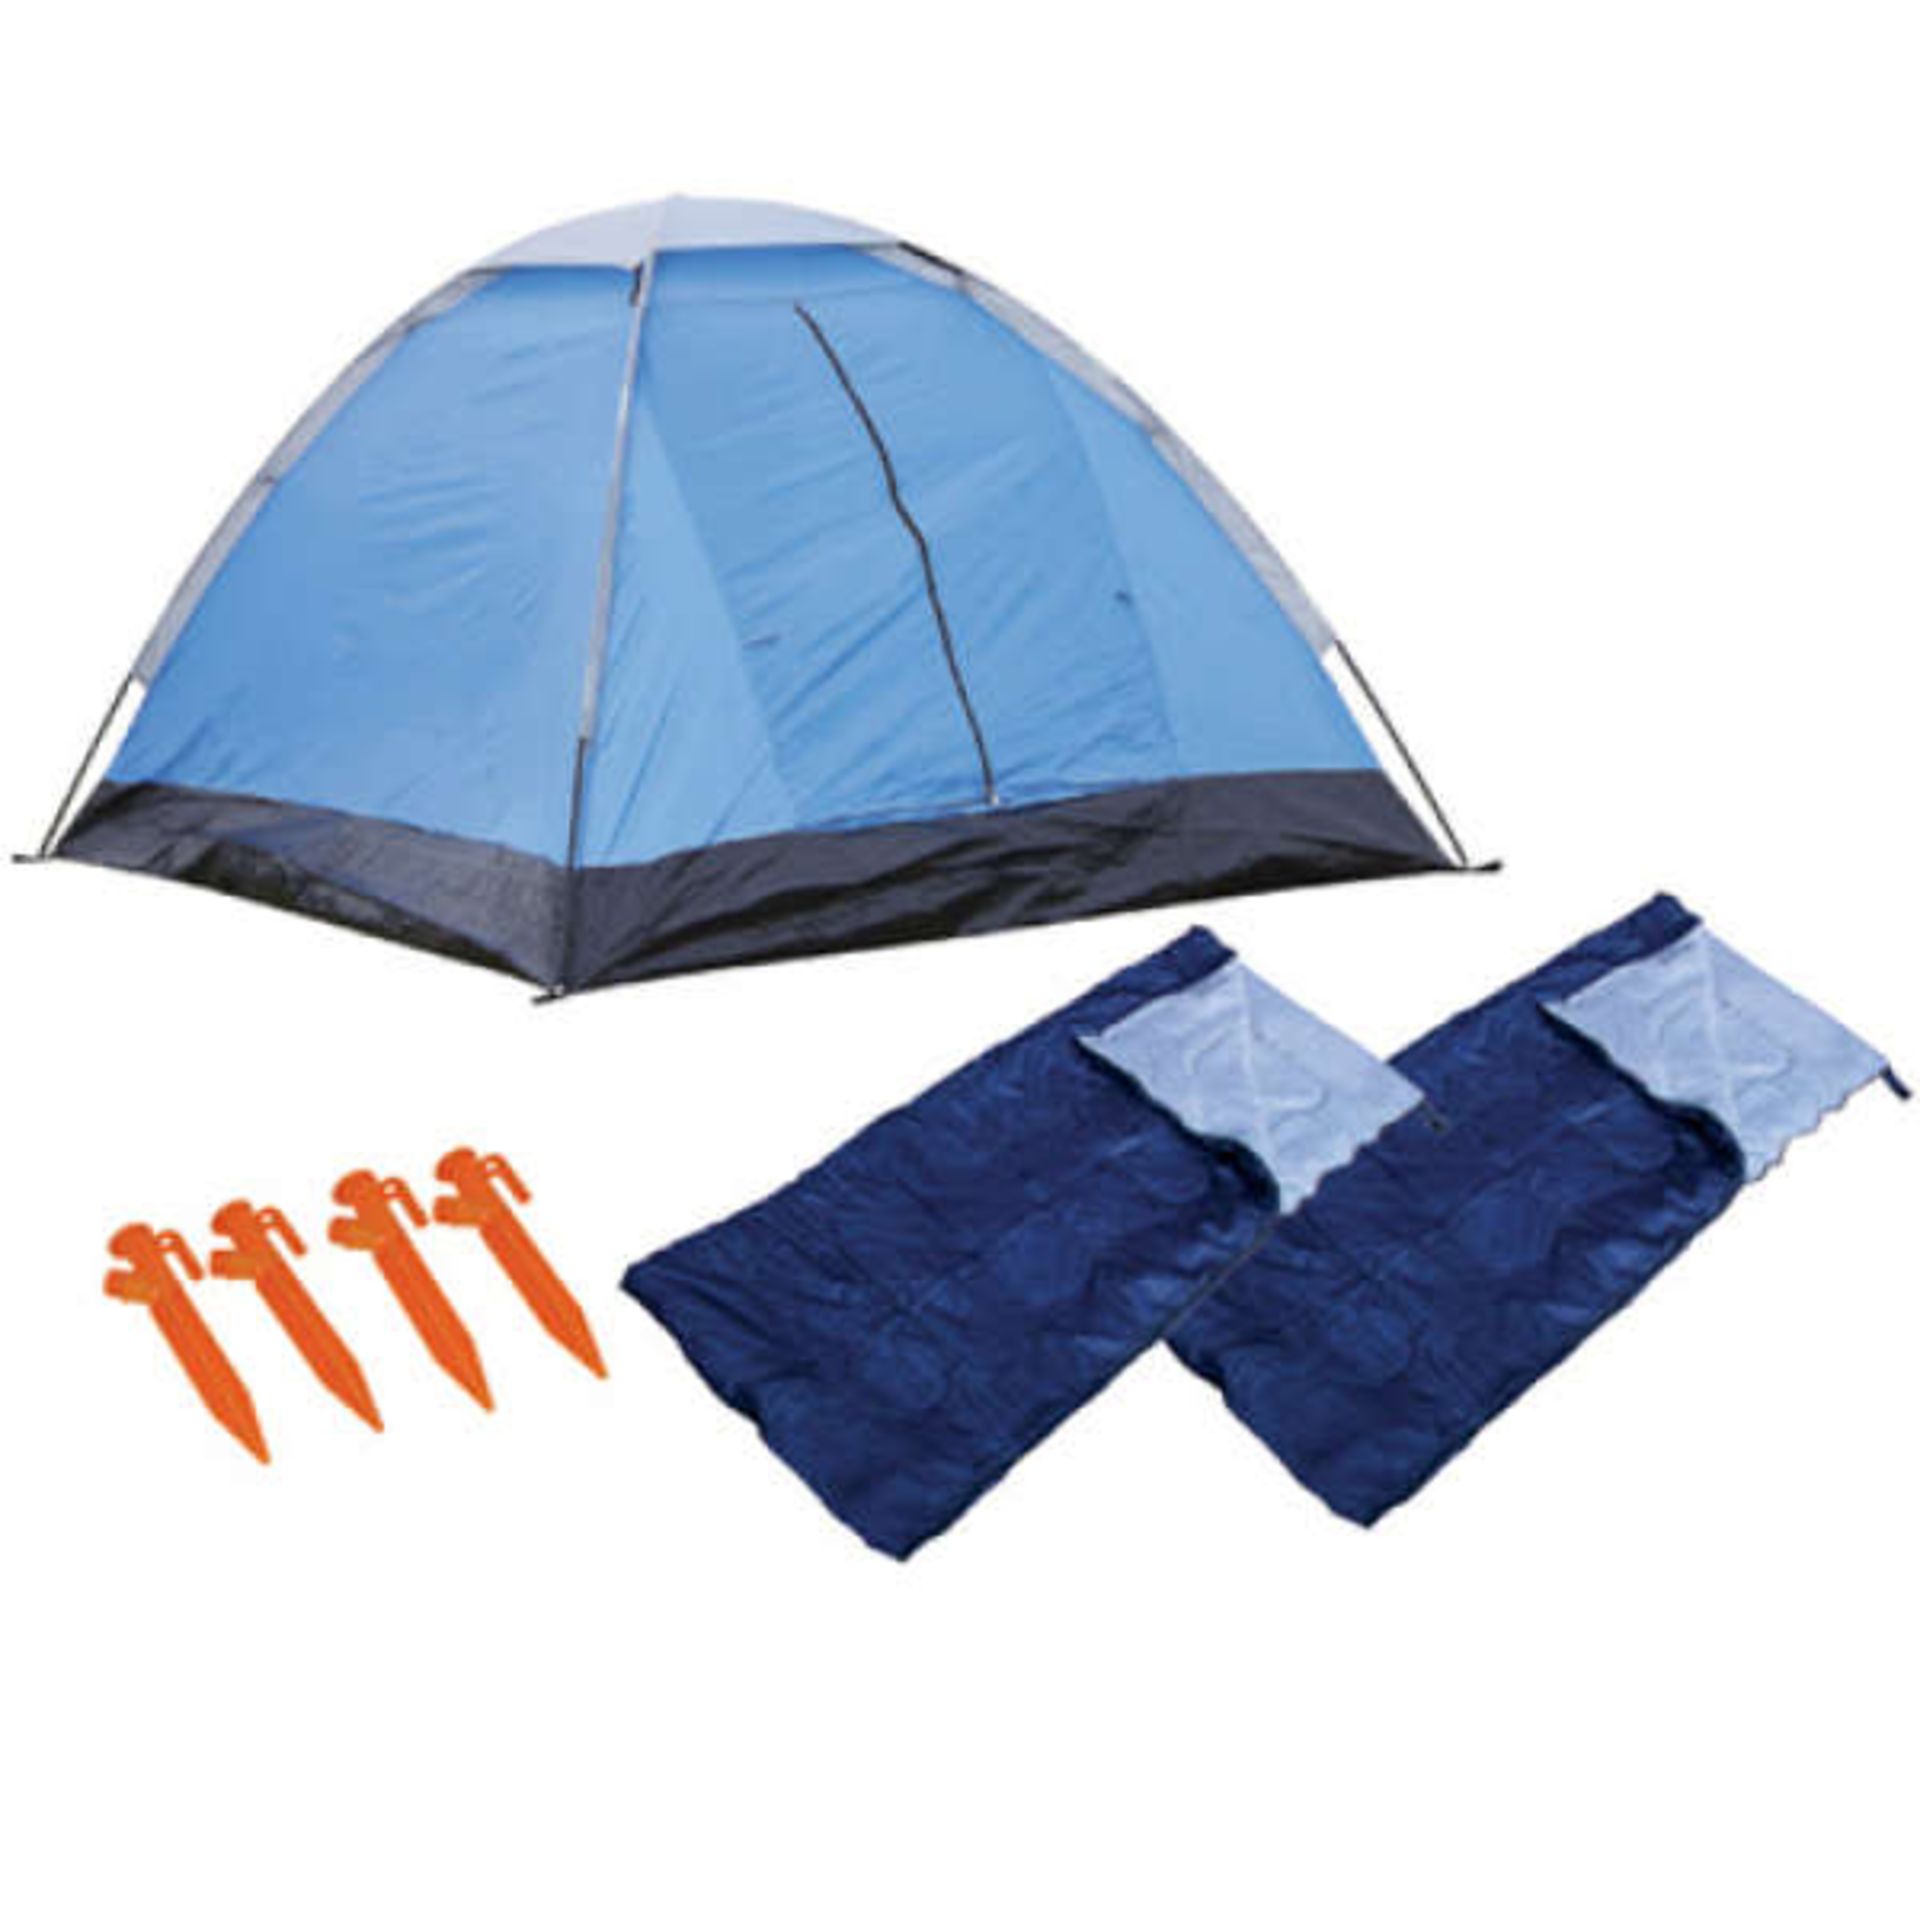 V Brand New Festival Camping Kit Containing 2 Person Tent, 2 Sleeping Bags And 4 LEDs